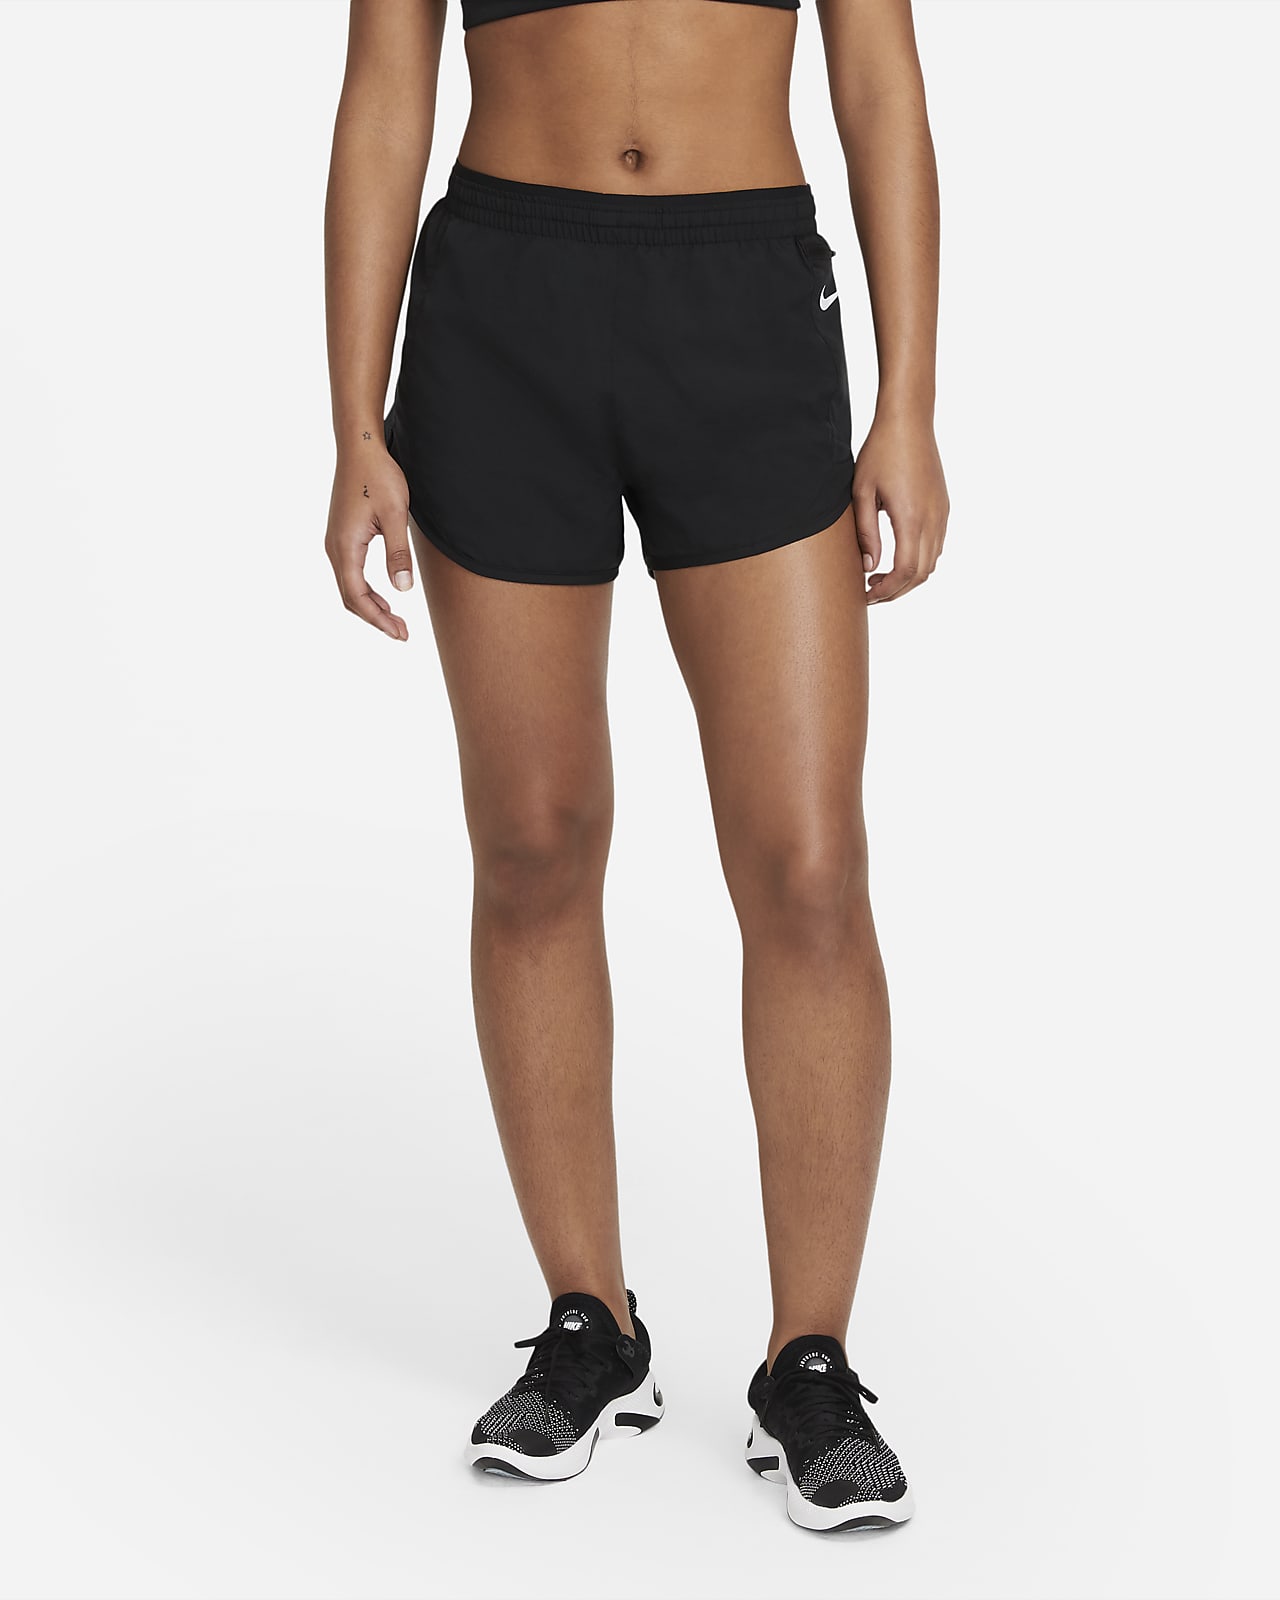 Runner's Guide to Wearing Compression Shorts. Nike LU